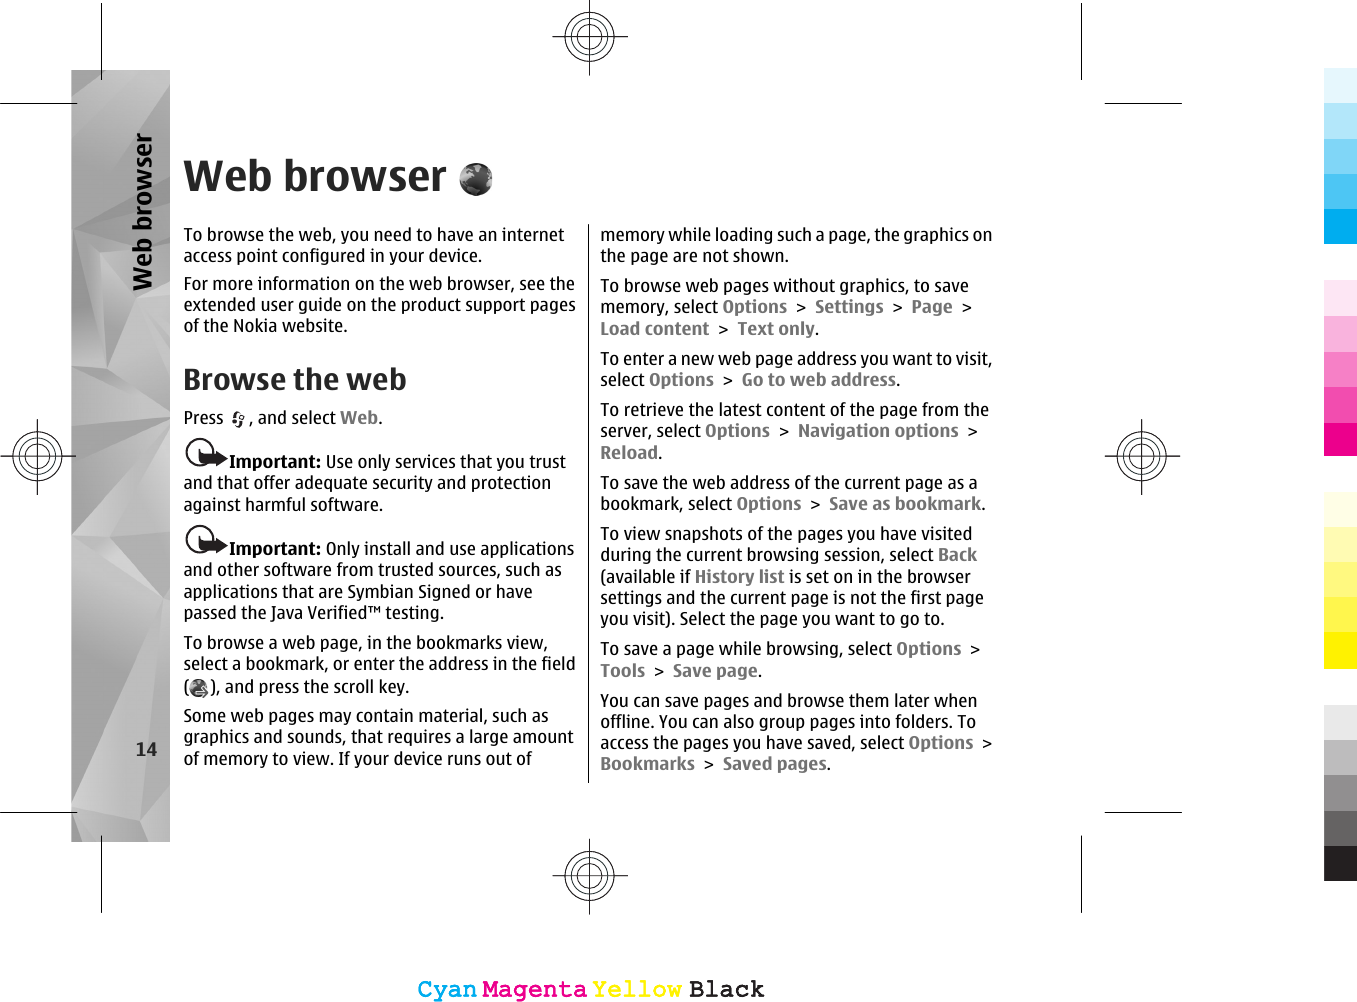 Web browserTo browse the web, you need to have an internetaccess point configured in your device.For more information on the web browser, see theextended user guide on the product support pagesof the Nokia website.Browse the webPress  , and select Web.Important: Use only services that you trustand that offer adequate security and protectionagainst harmful software.Important: Only install and use applicationsand other software from trusted sources, such asapplications that are Symbian Signed or havepassed the Java Verified™ testing.To browse a web page, in the bookmarks view,select a bookmark, or enter the address in the field(), and press the scroll key.Some web pages may contain material, such asgraphics and sounds, that requires a large amountof memory to view. If your device runs out ofmemory while loading such a page, the graphics onthe page are not shown.To browse web pages without graphics, to savememory, select Options &gt; Settings &gt; Page &gt;Load content &gt; Text only.To enter a new web page address you want to visit,select Options &gt; Go to web address.To retrieve the latest content of the page from theserver, select Options &gt; Navigation options &gt;Reload.To save the web address of the current page as abookmark, select Options &gt; Save as bookmark.To view snapshots of the pages you have visitedduring the current browsing session, select Back(available if History list is set on in the browsersettings and the current page is not the first pageyou visit). Select the page you want to go to.To save a page while browsing, select Options &gt;Tools &gt; Save page.You can save pages and browse them later whenoffline. You can also group pages into folders. Toaccess the pages you have saved, select Options &gt;Bookmarks &gt; Saved pages.14Web browserCyanCyanMagentaMagentaYellowYellowBlackBlackCyanCyanMagentaMagentaYellowYellowBlackBlack